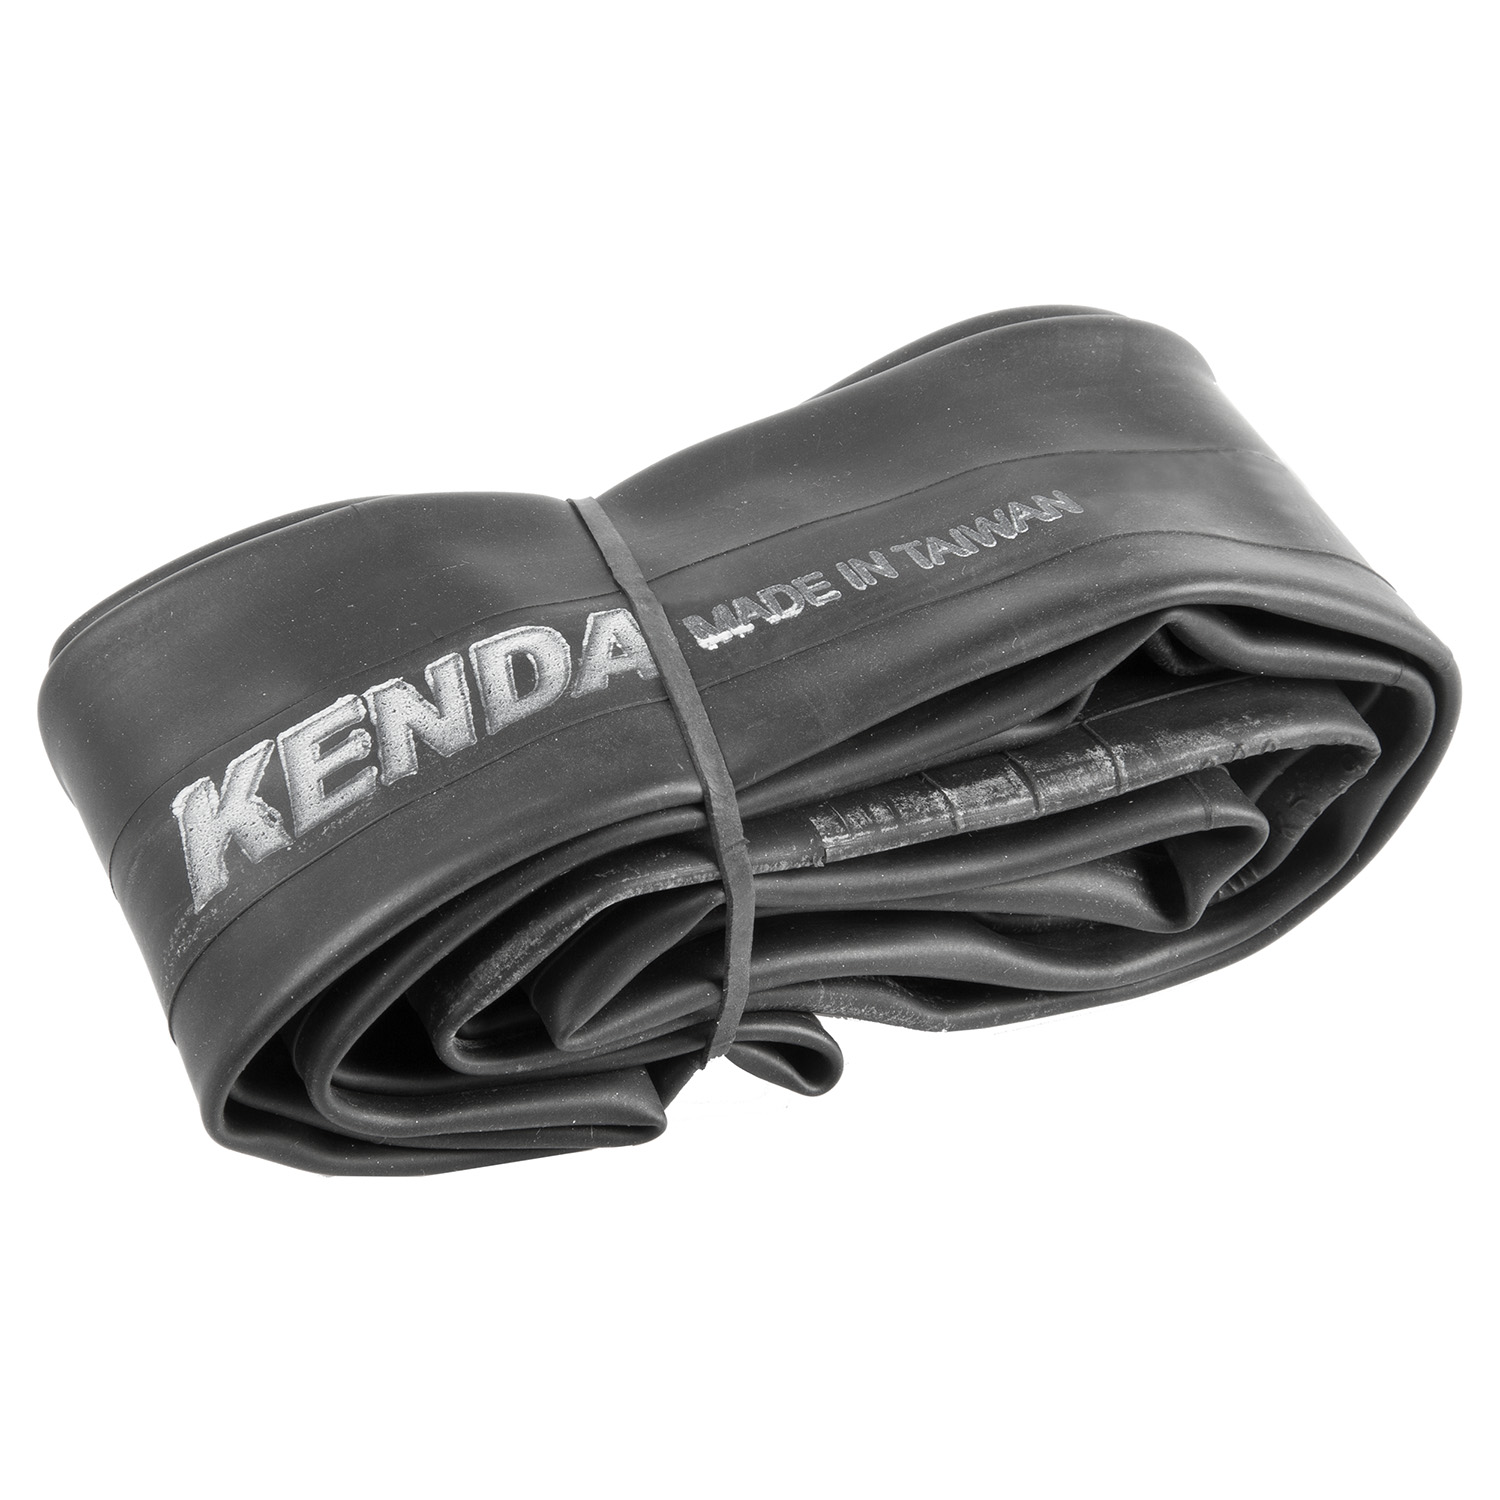 KENDA 700 x 23 – 26 C bicycle tube – AVAILABLE IN SELECTED BIKE SHOPS